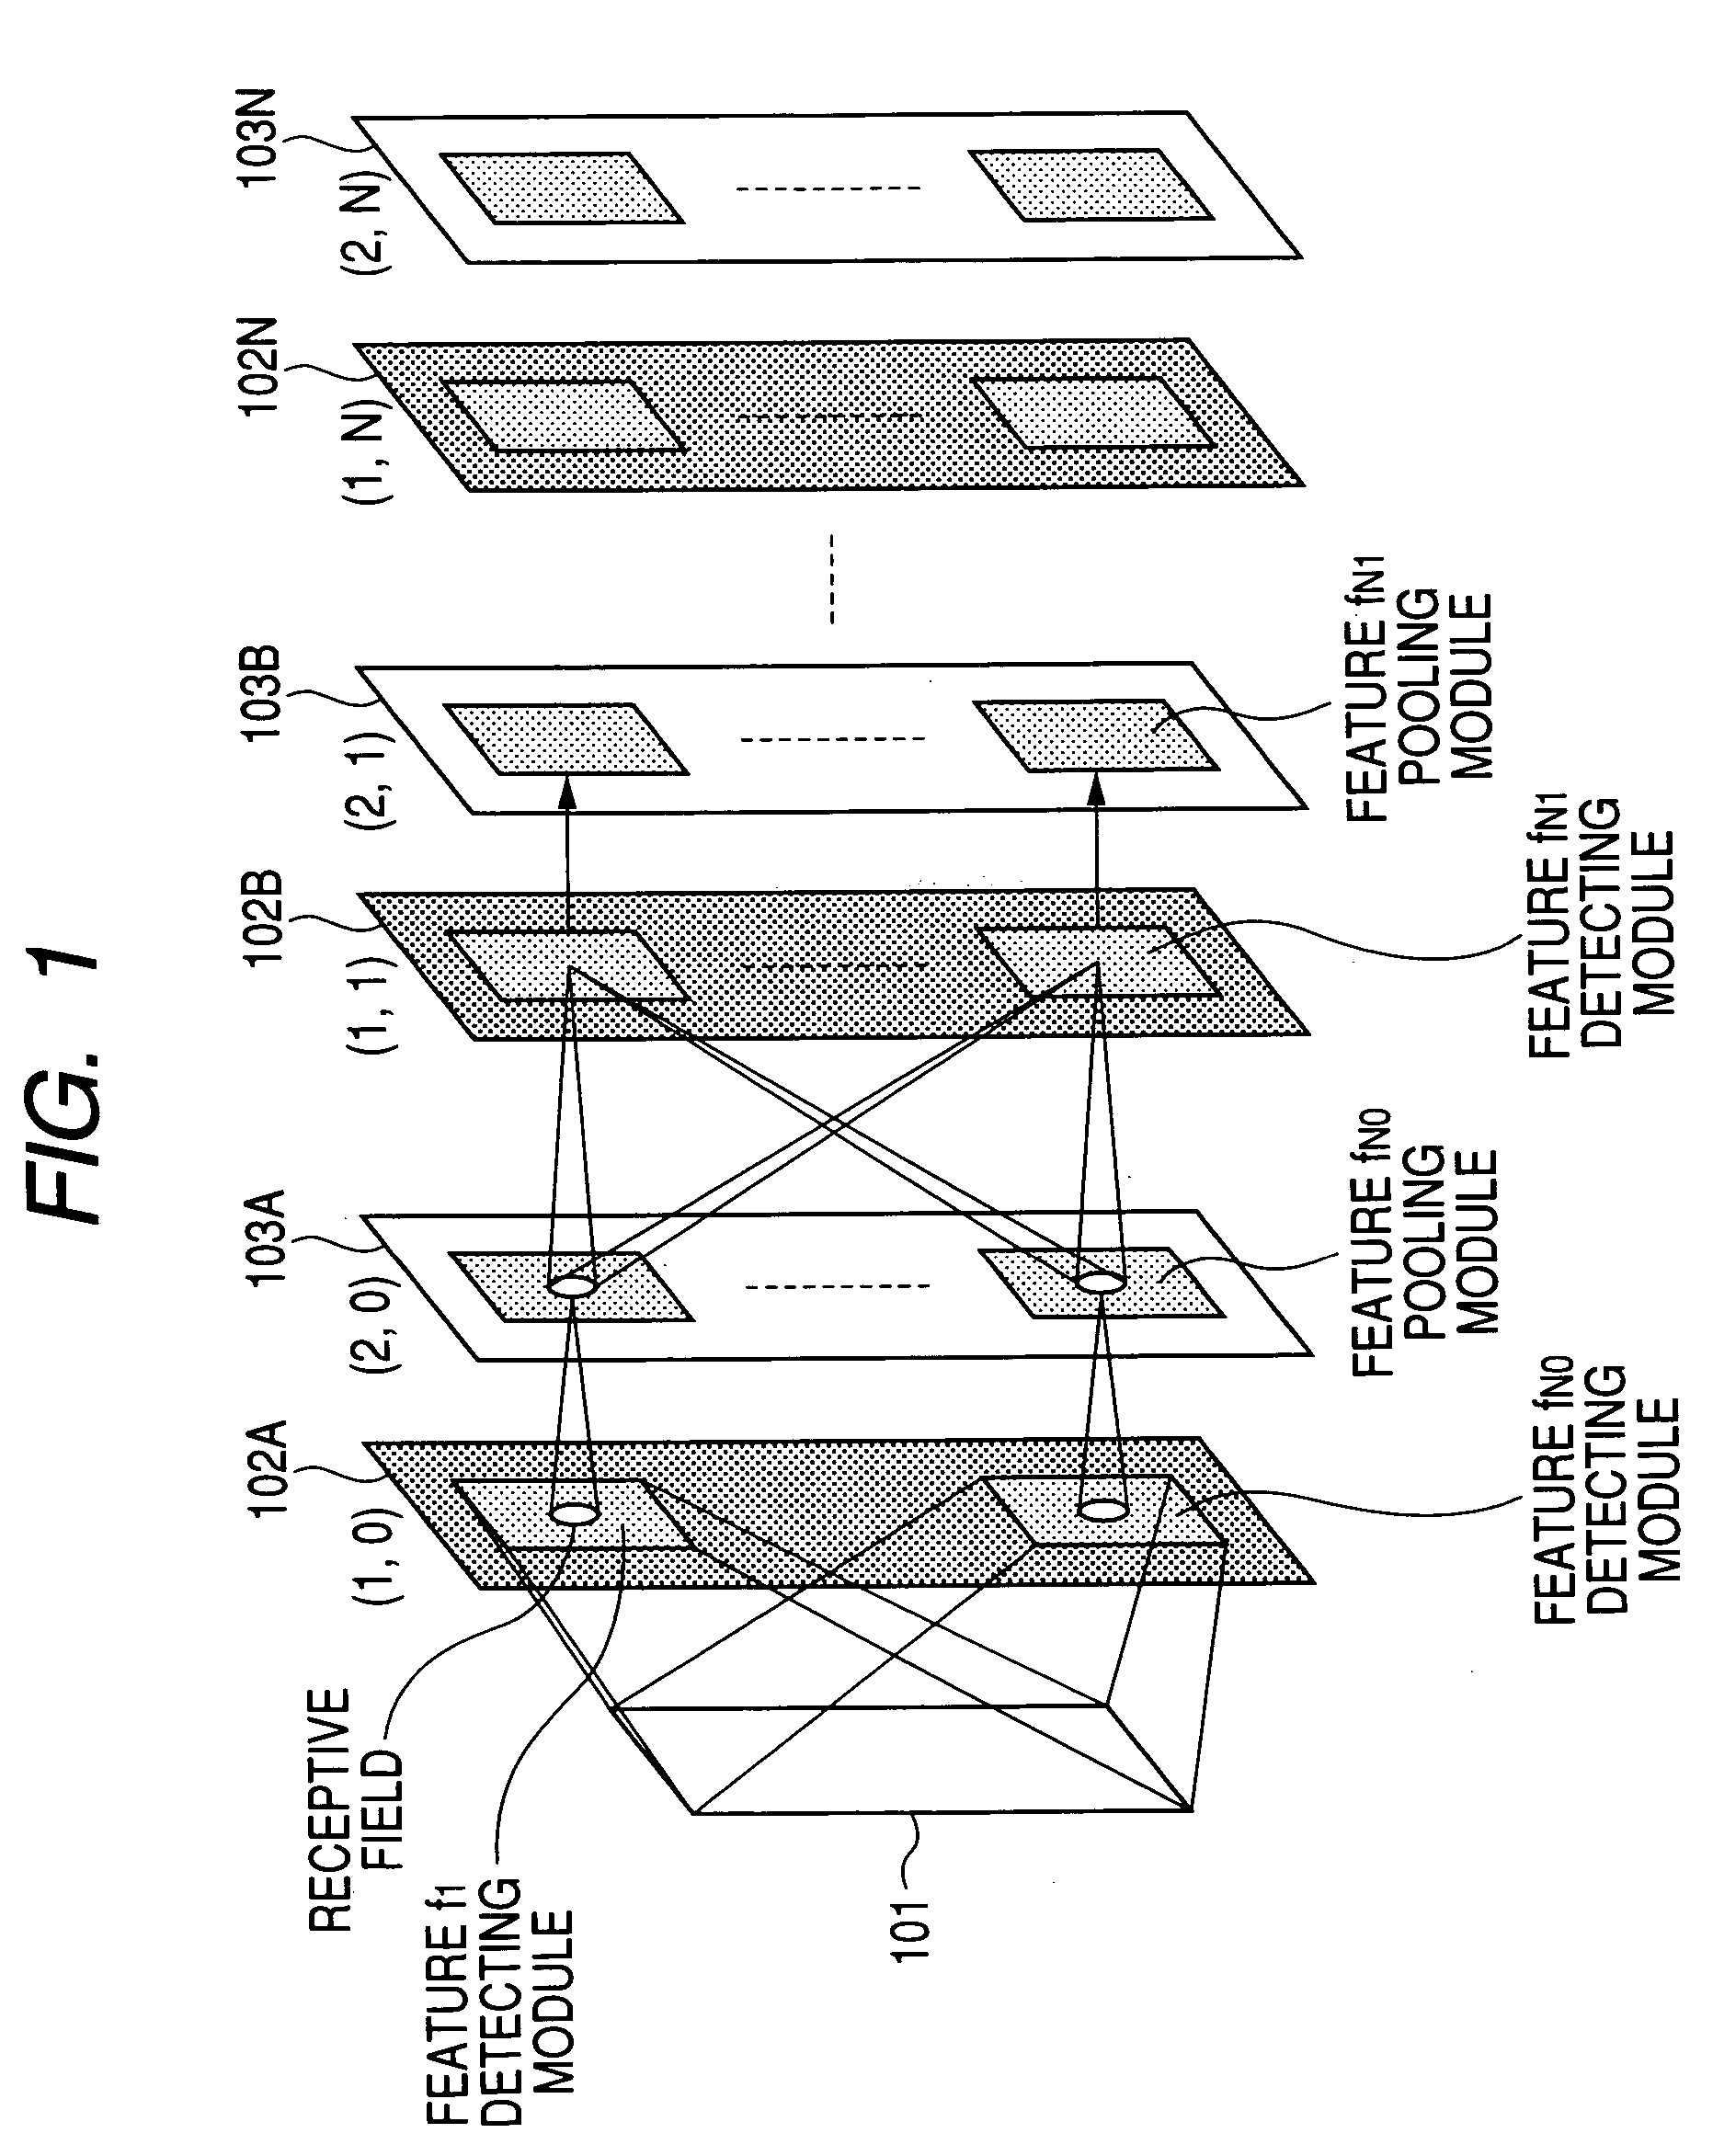 Learning method and device for pattern recognition